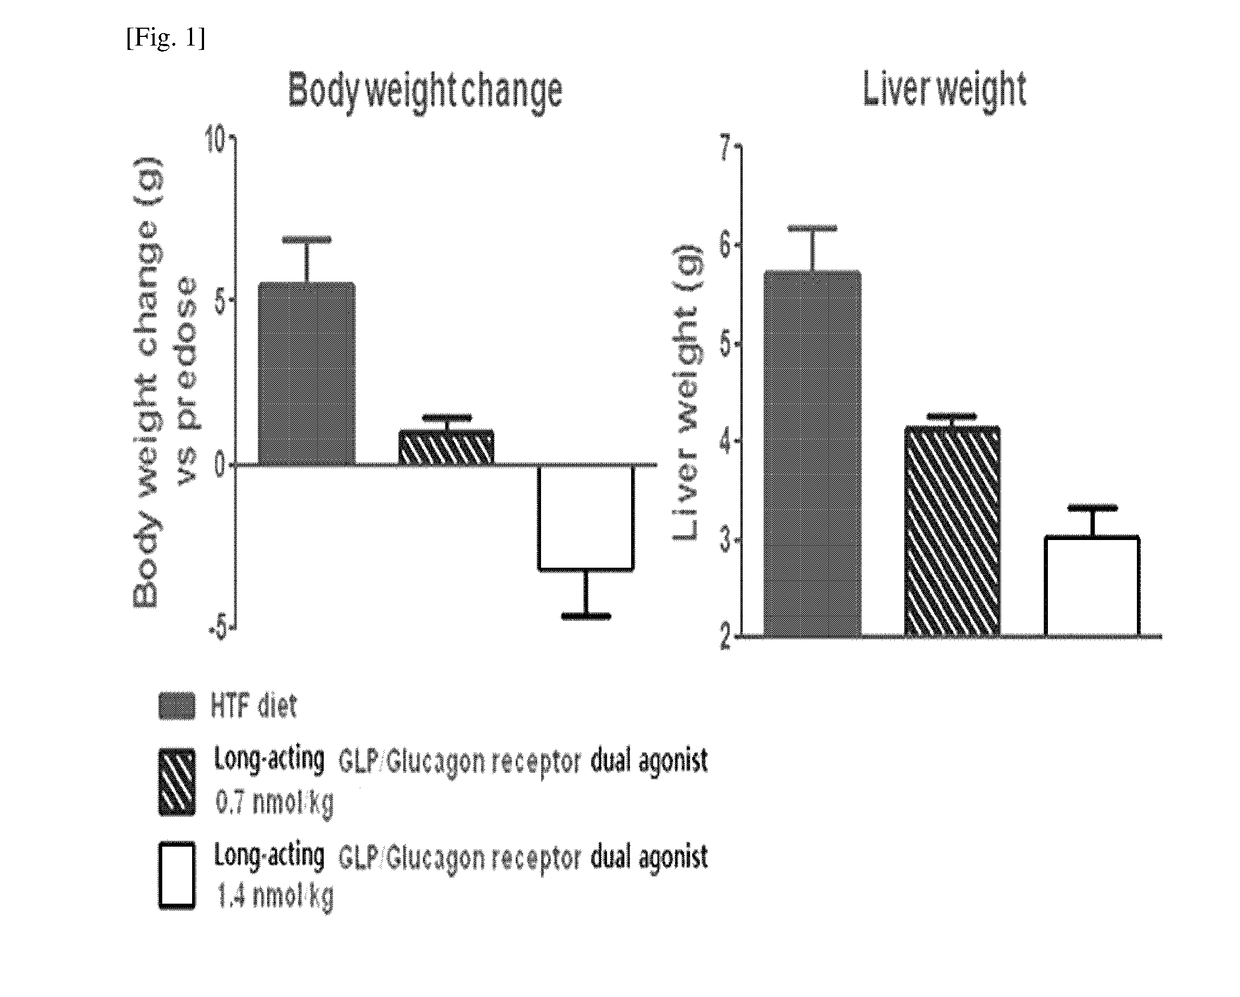 Use of a long acting glp-1/glucagon receptor dual agonist for the treatment of non-alcoholic fatty liver disease